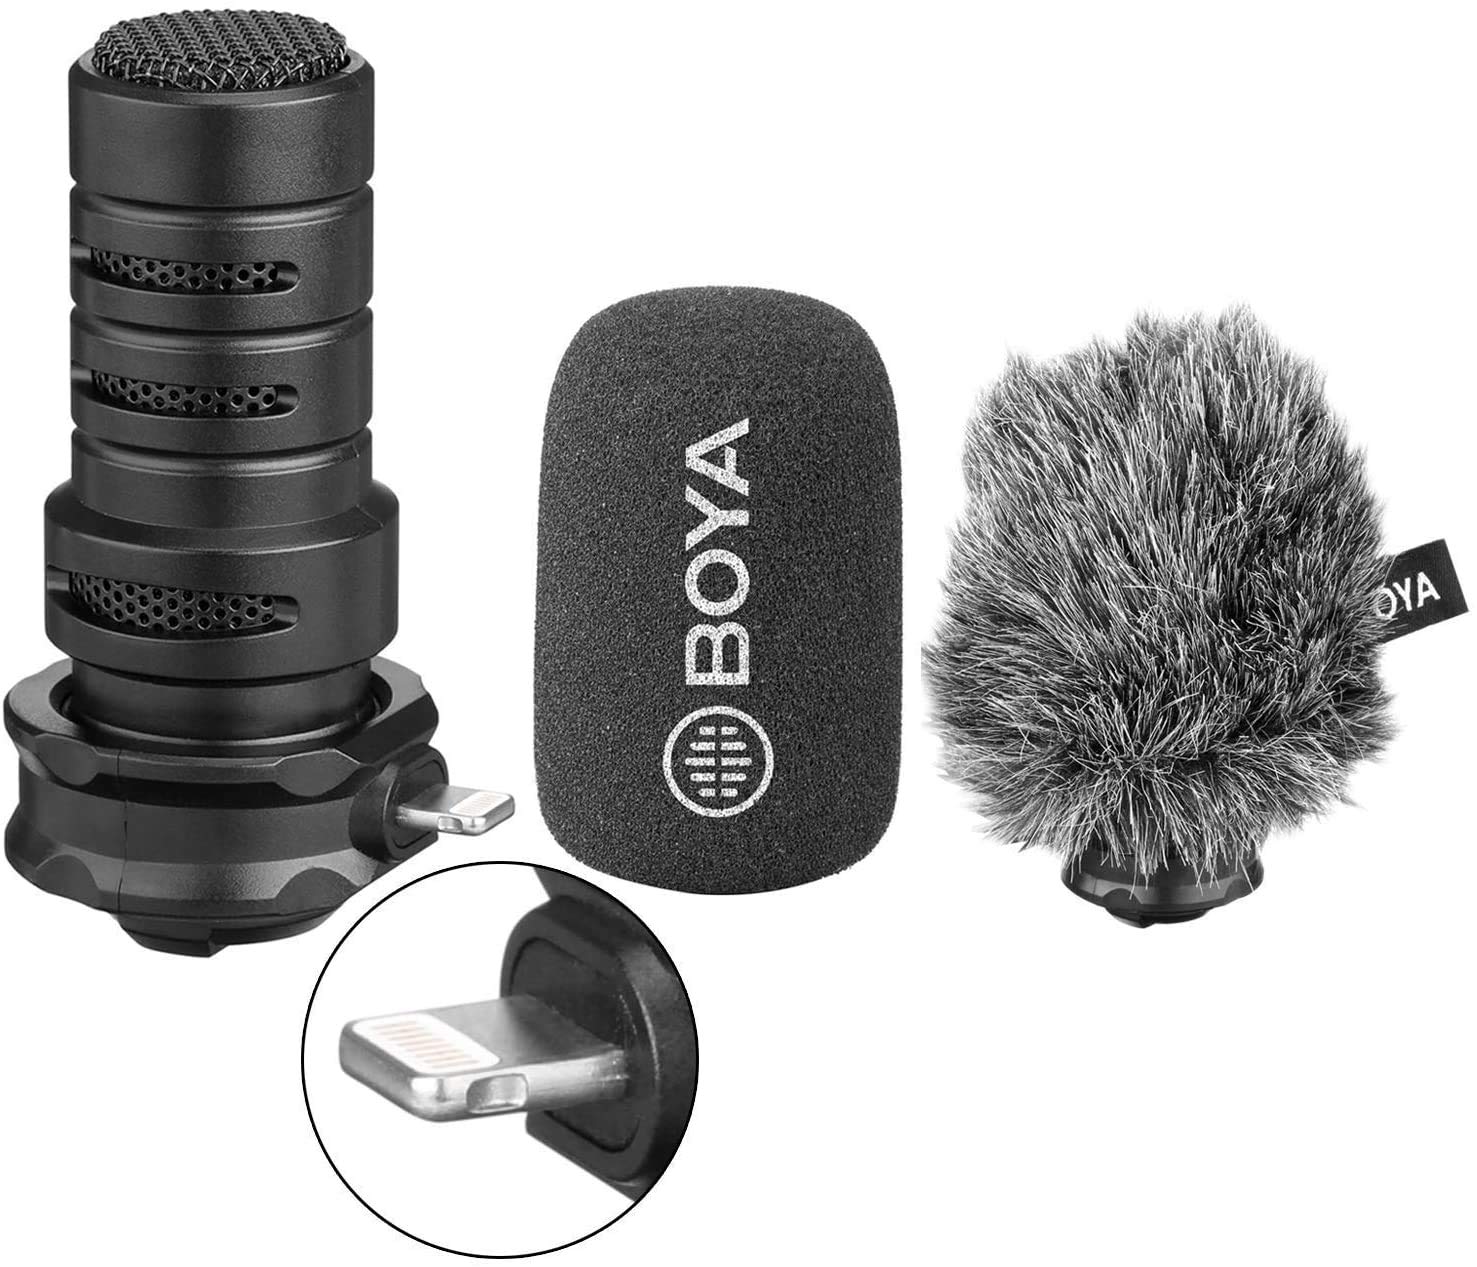 BOYA LIGHTNING CONDENSER MICROPHONE SUPERB SOUND FOR iOS DEVICES BY-DM200